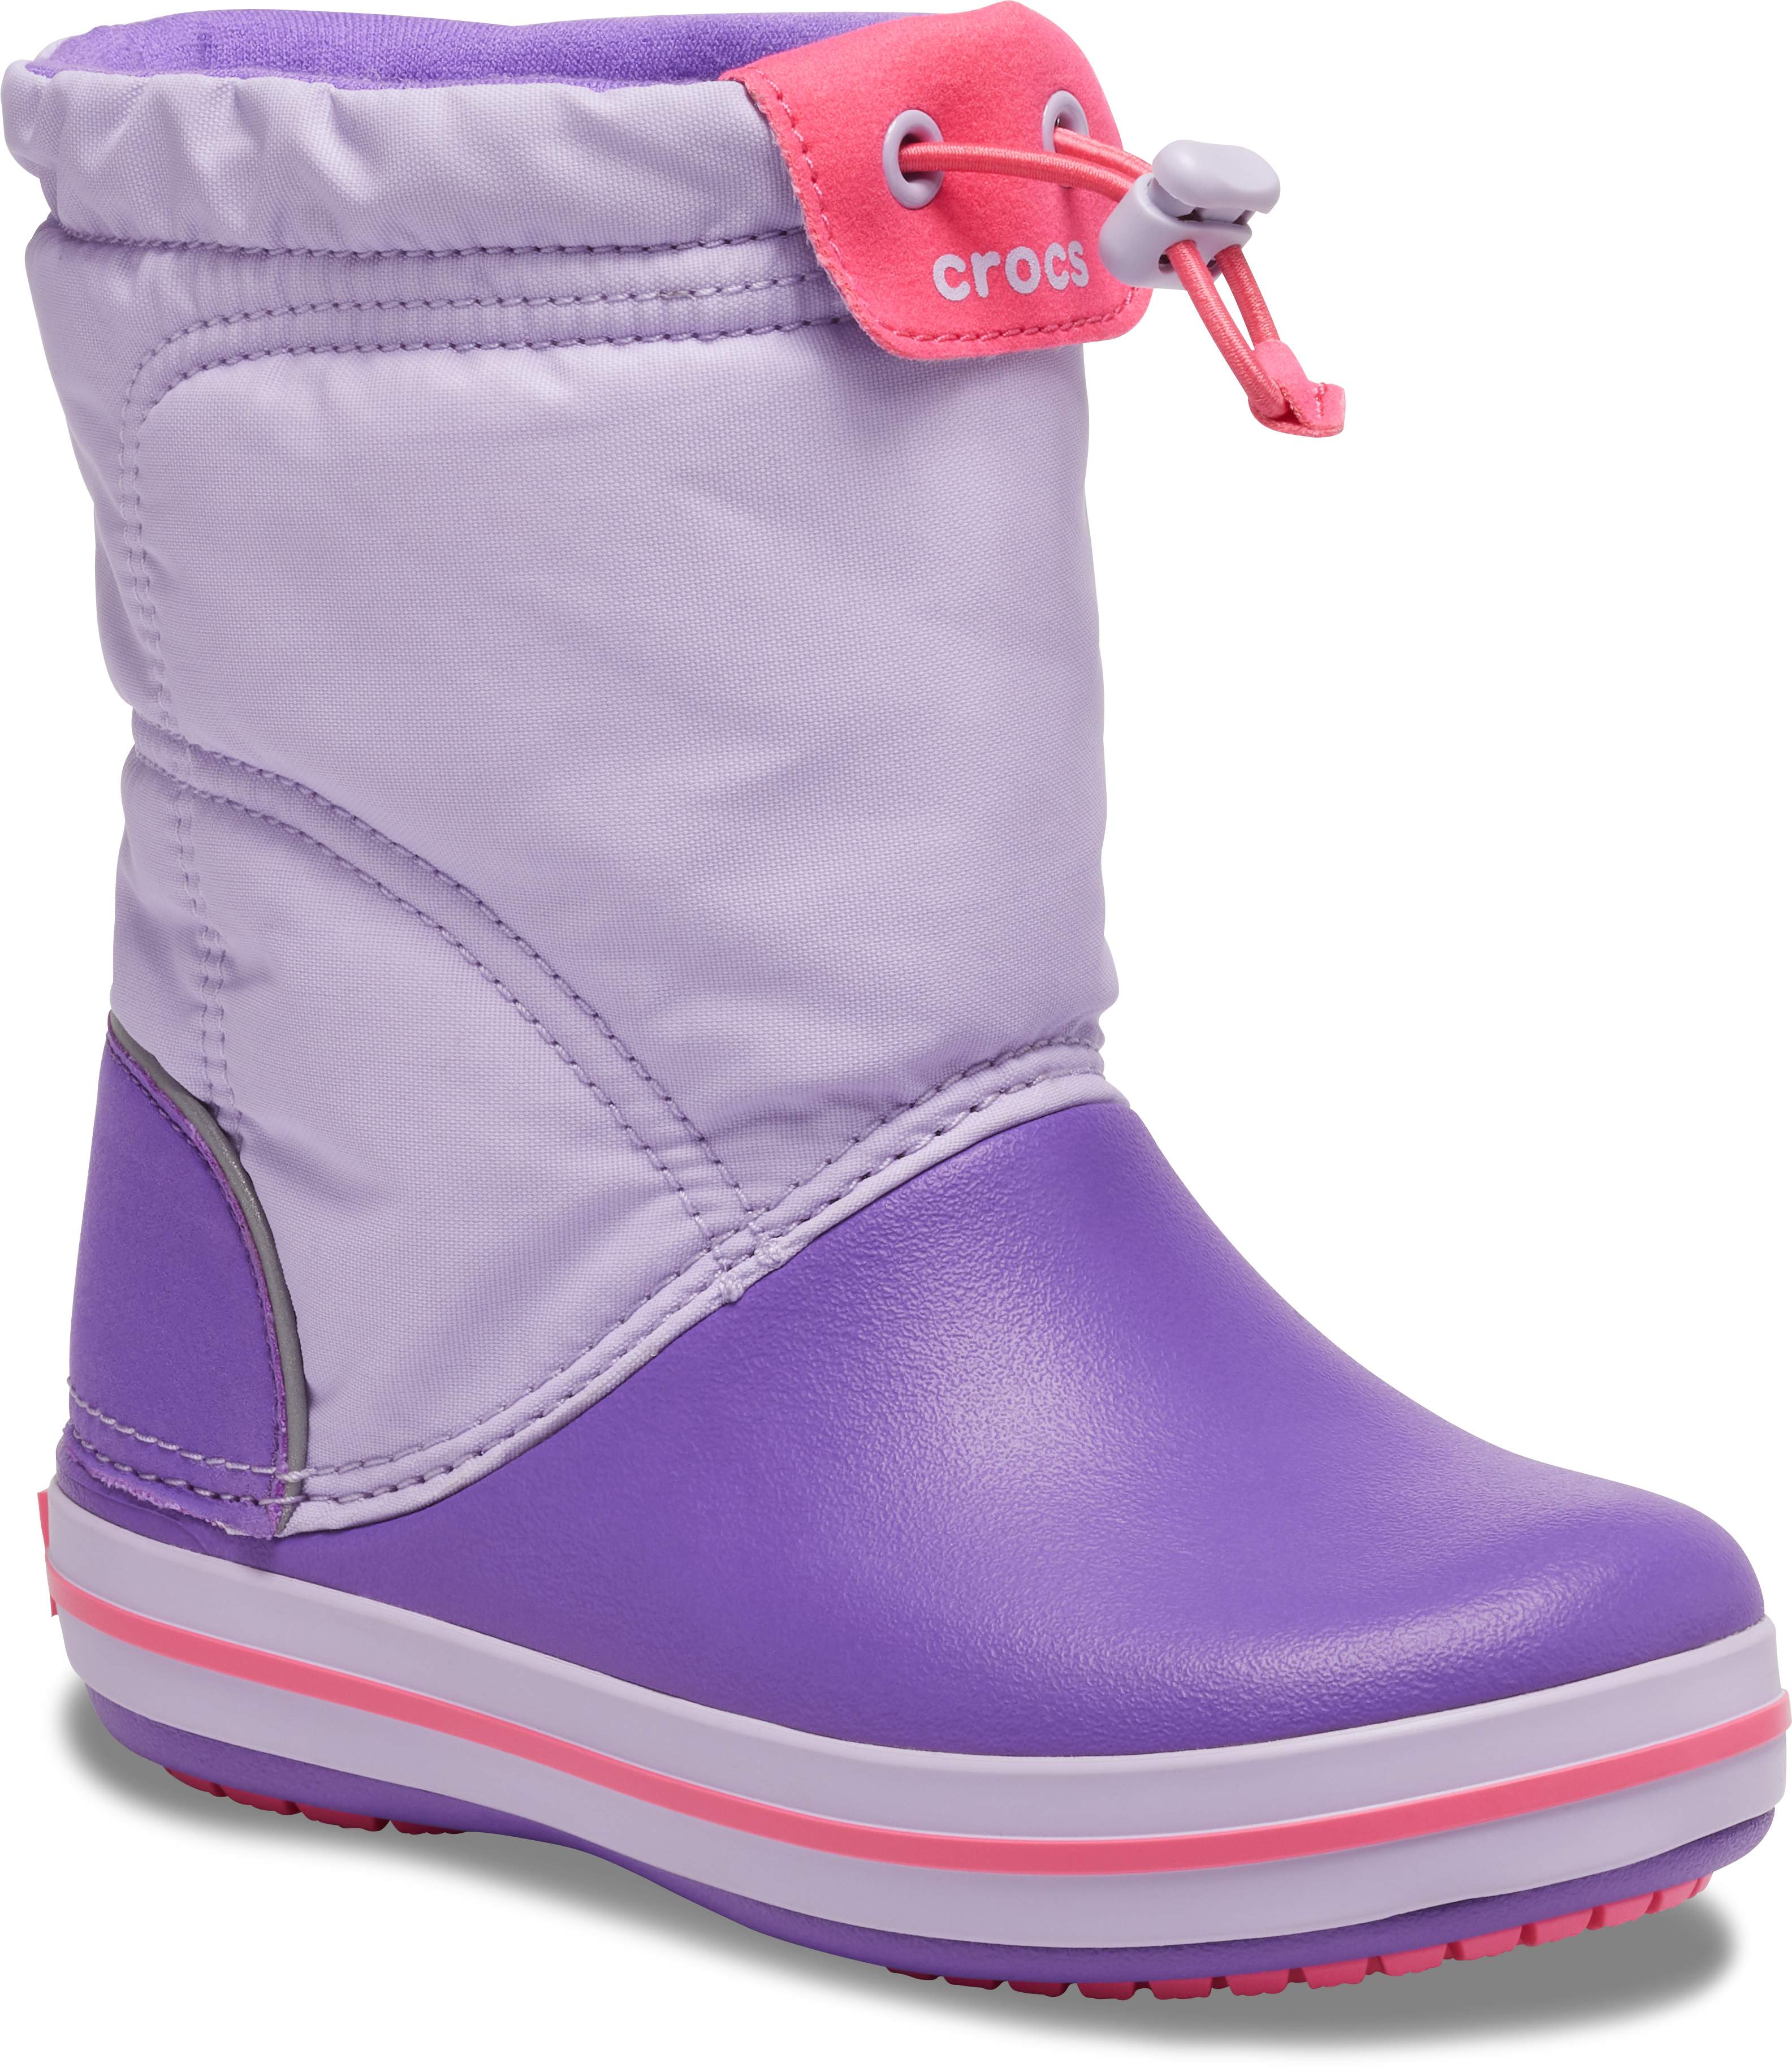 crocs lodgepoint kid's winter boots